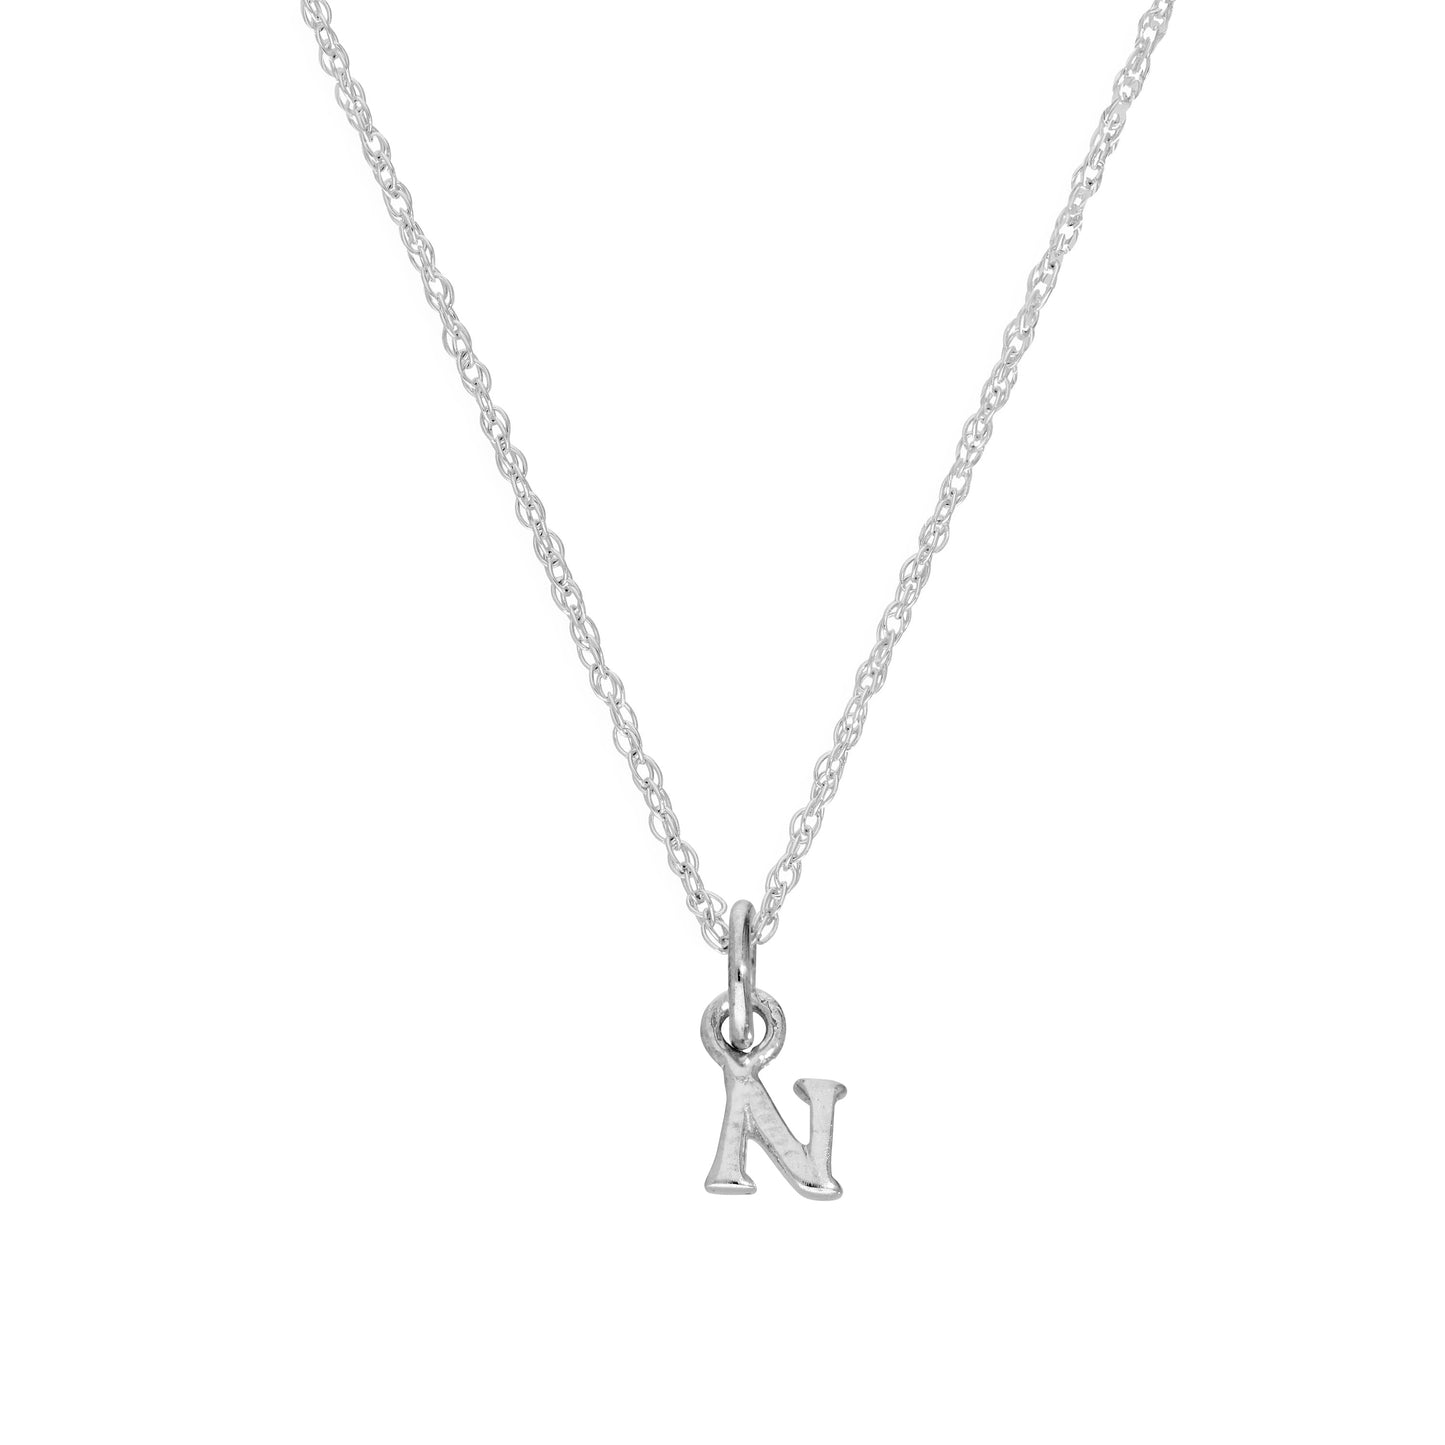 Tiny Sterling Silver Alphabet Letter N Pendant Necklace 14 - 22 Inches